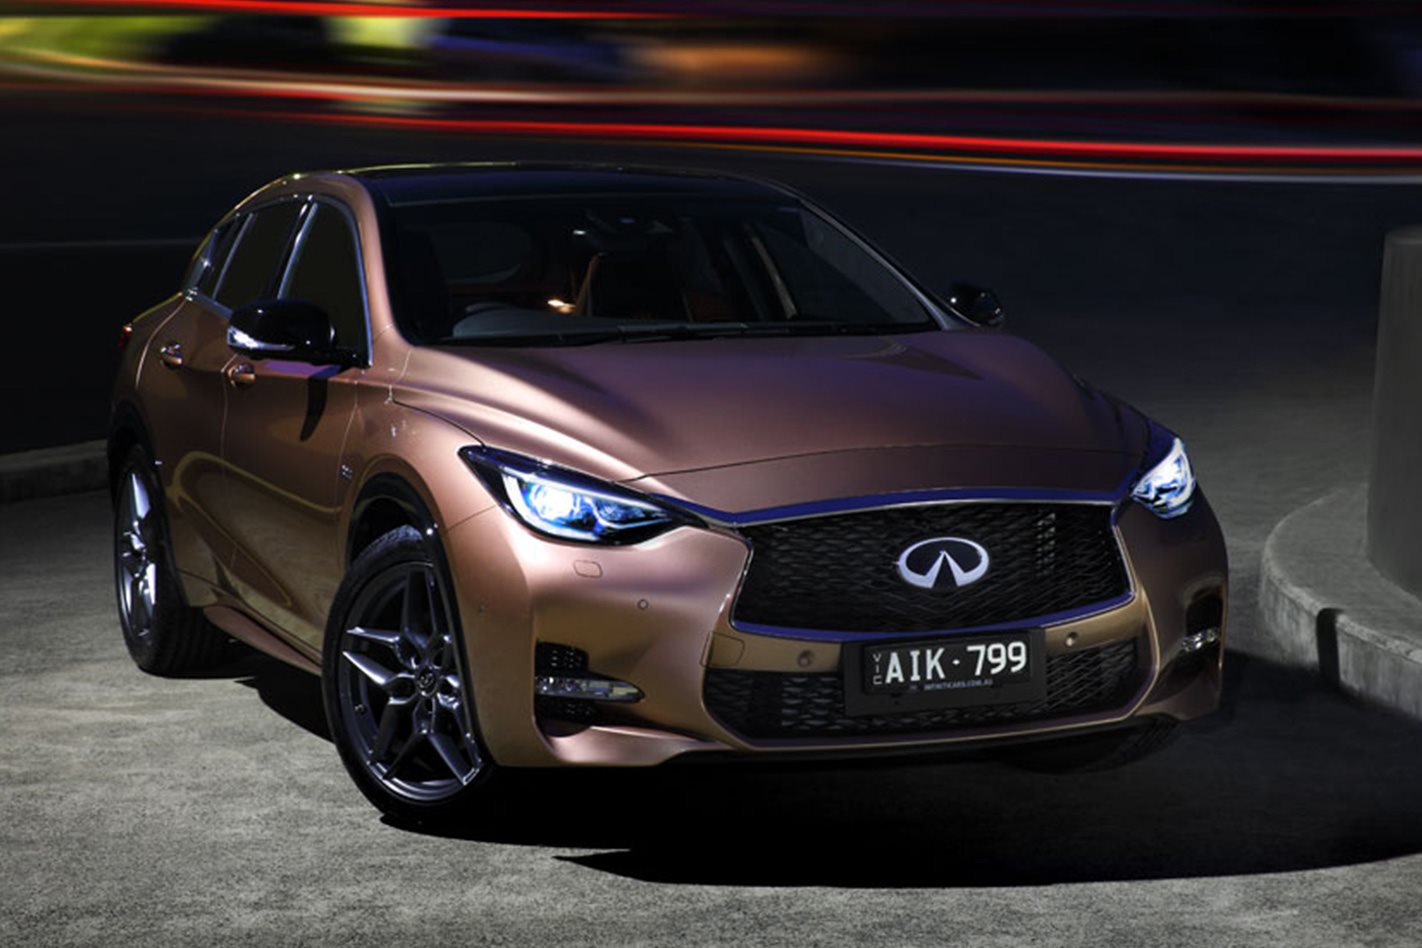 Infiniti Q30 8 things you didn’t know